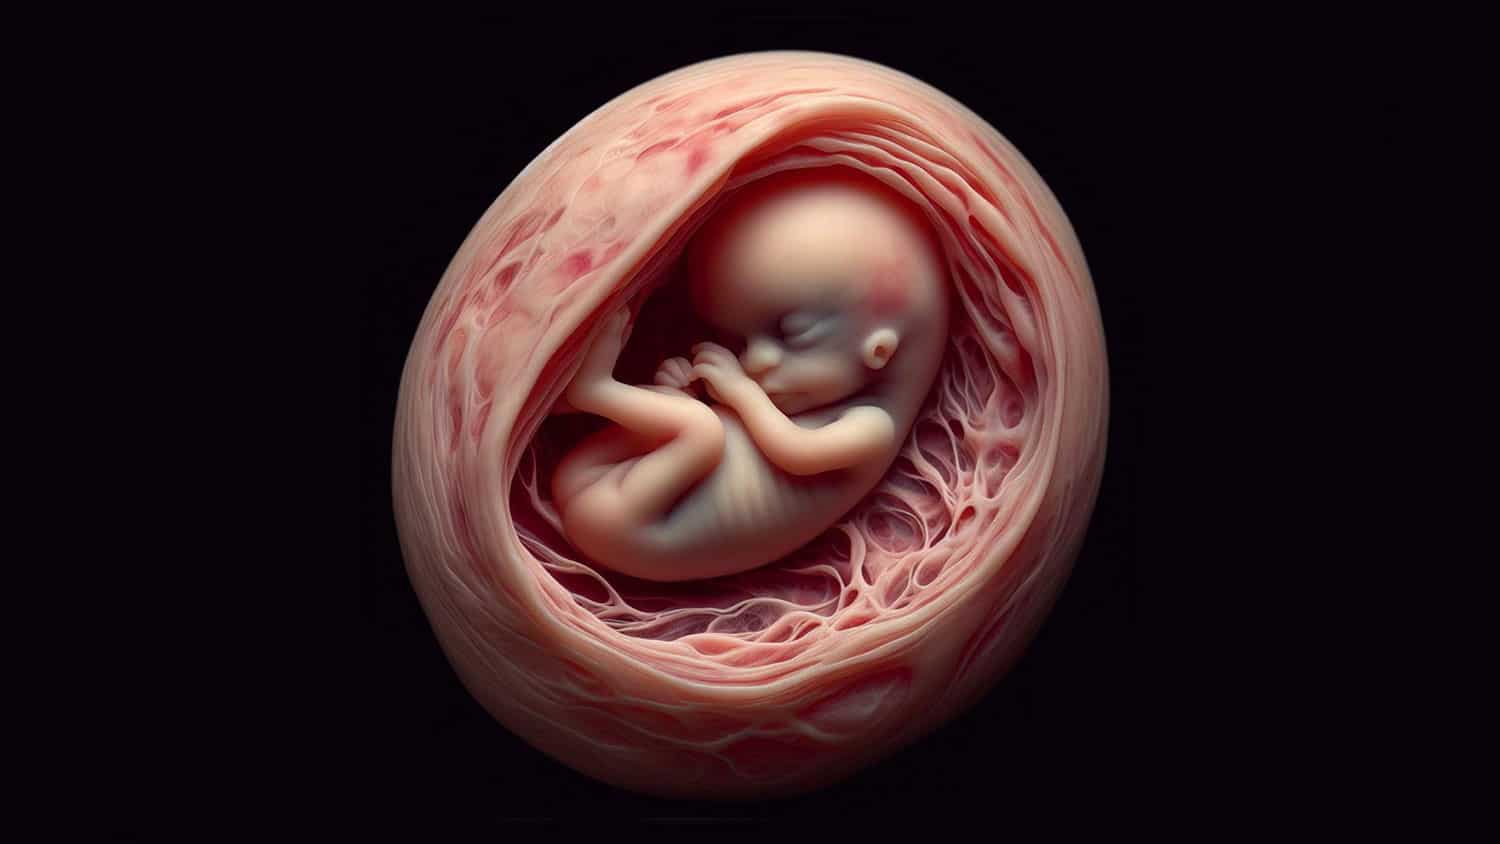 Fetus in the womb of the mother